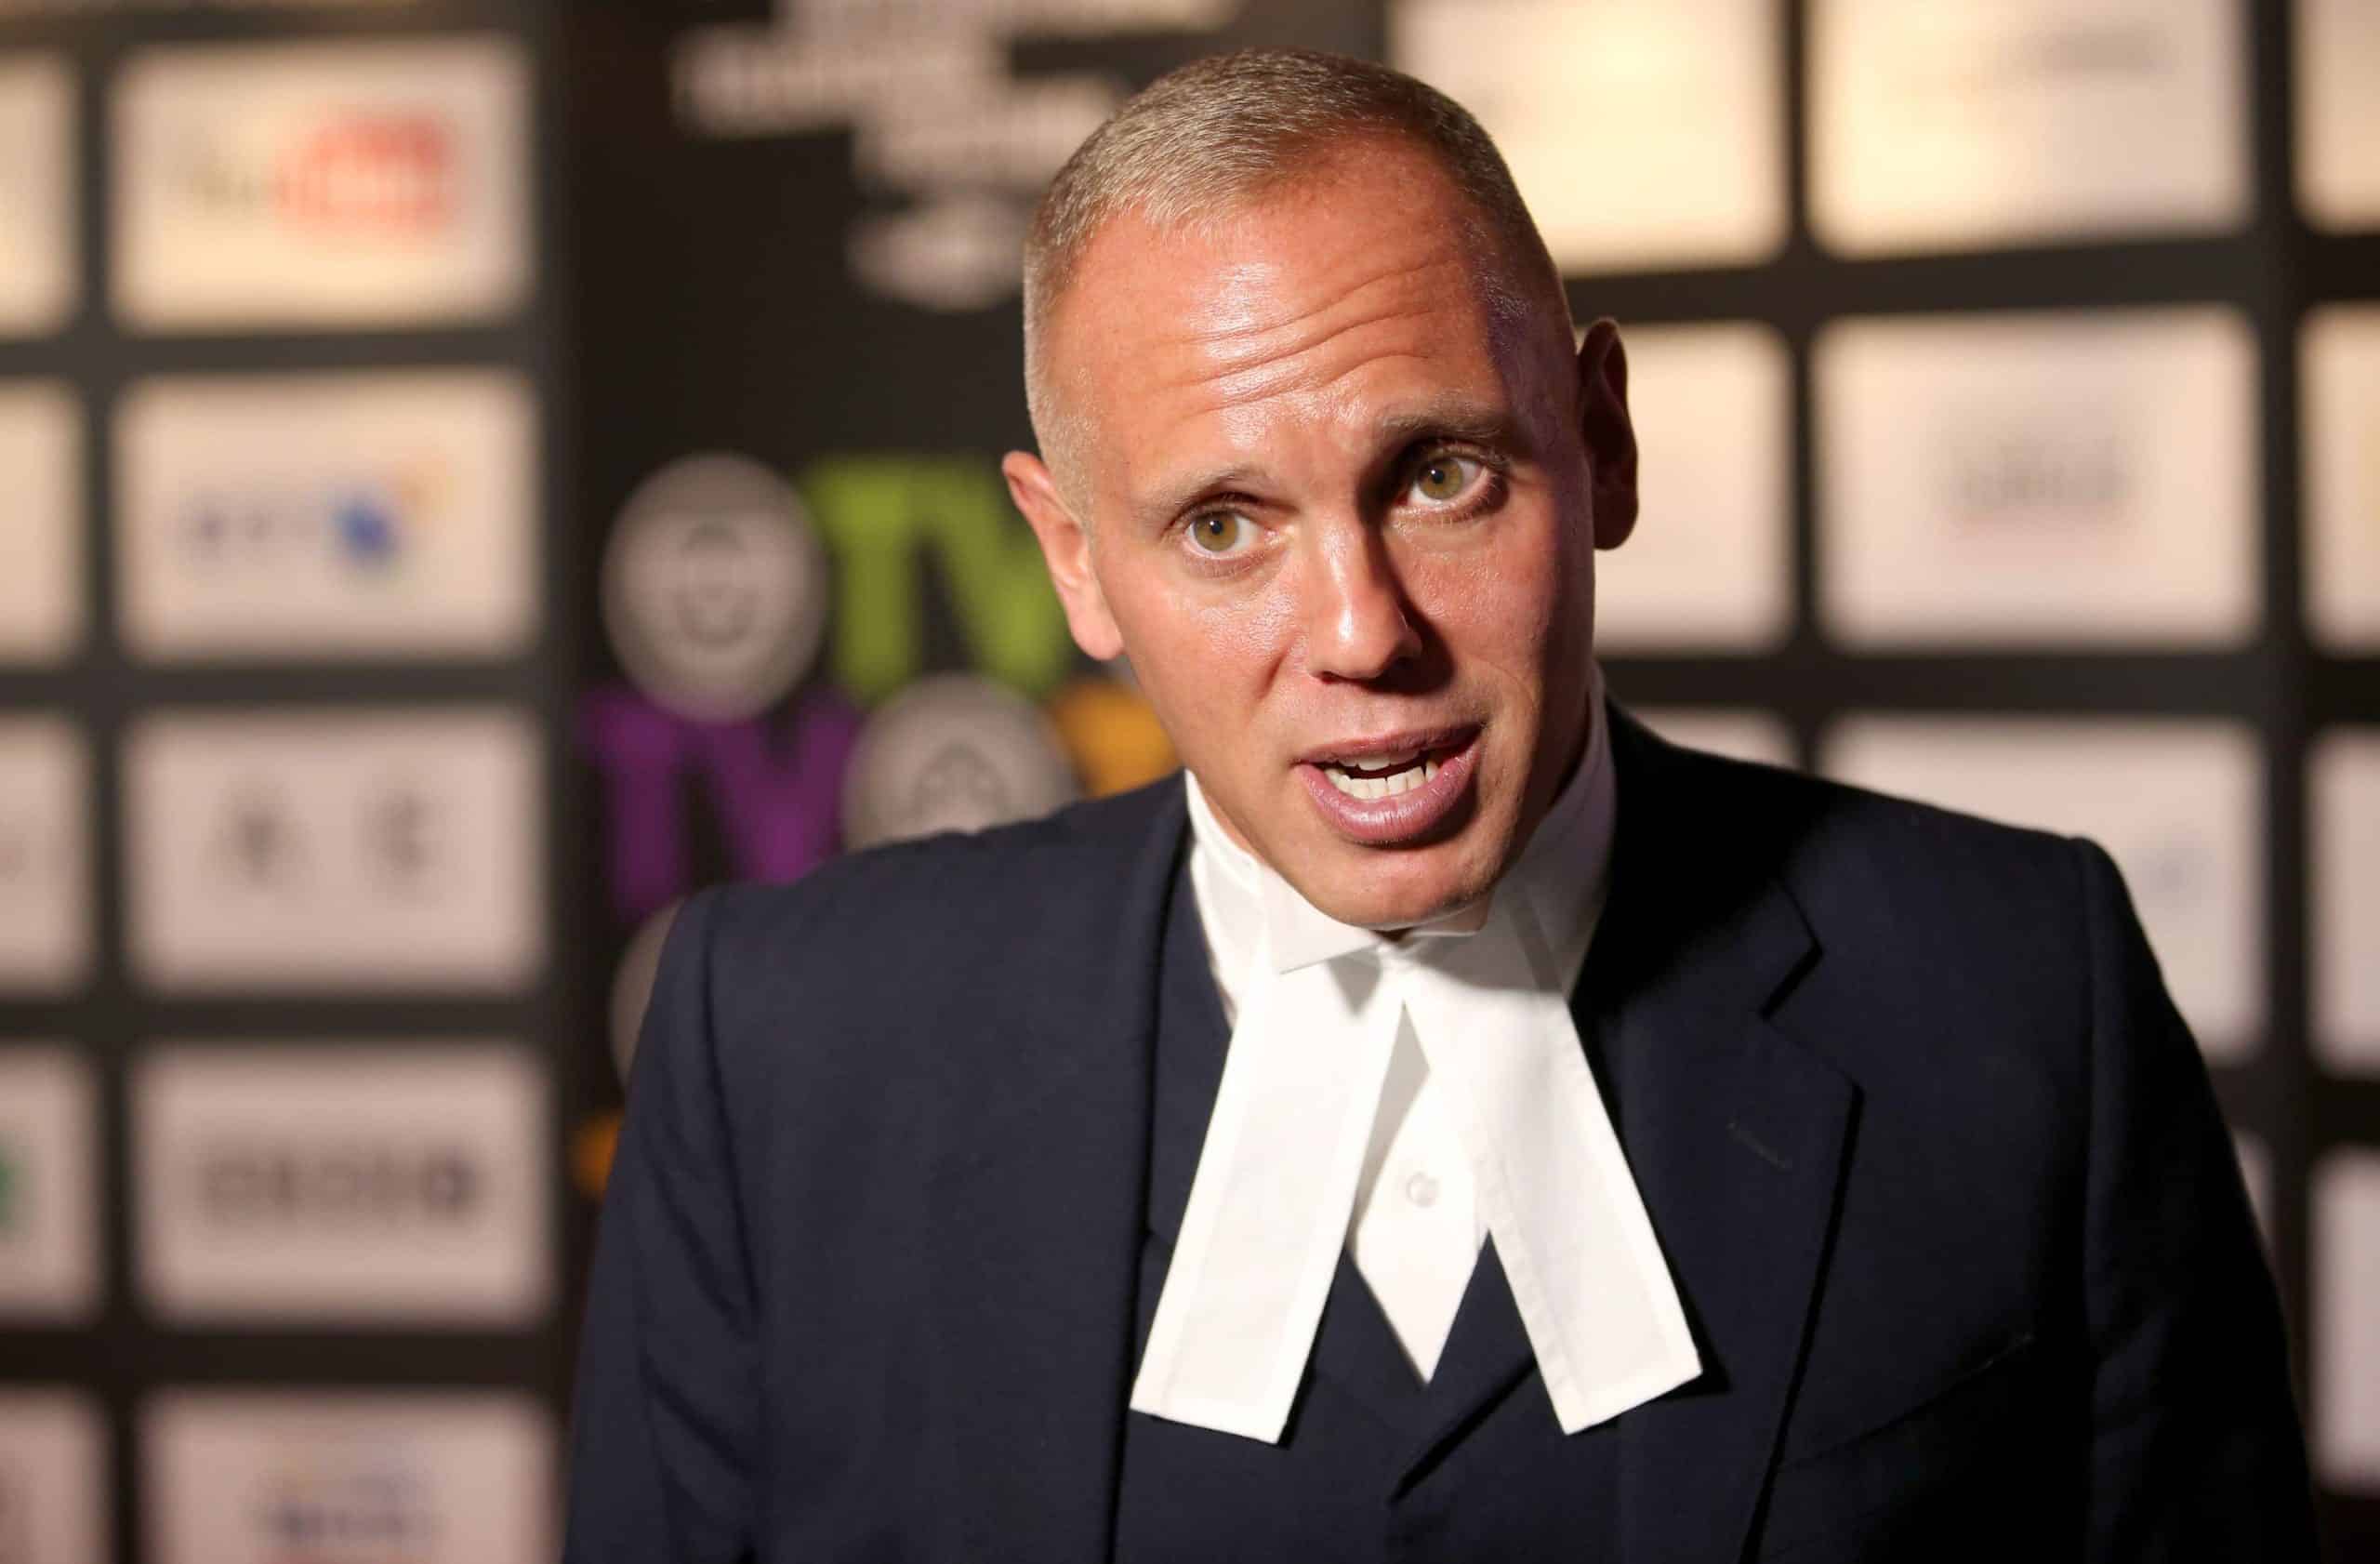 Watch: Academic slams Govt claims it takes most refugees as Judge Rinder can’t find UK visa centre in Poland